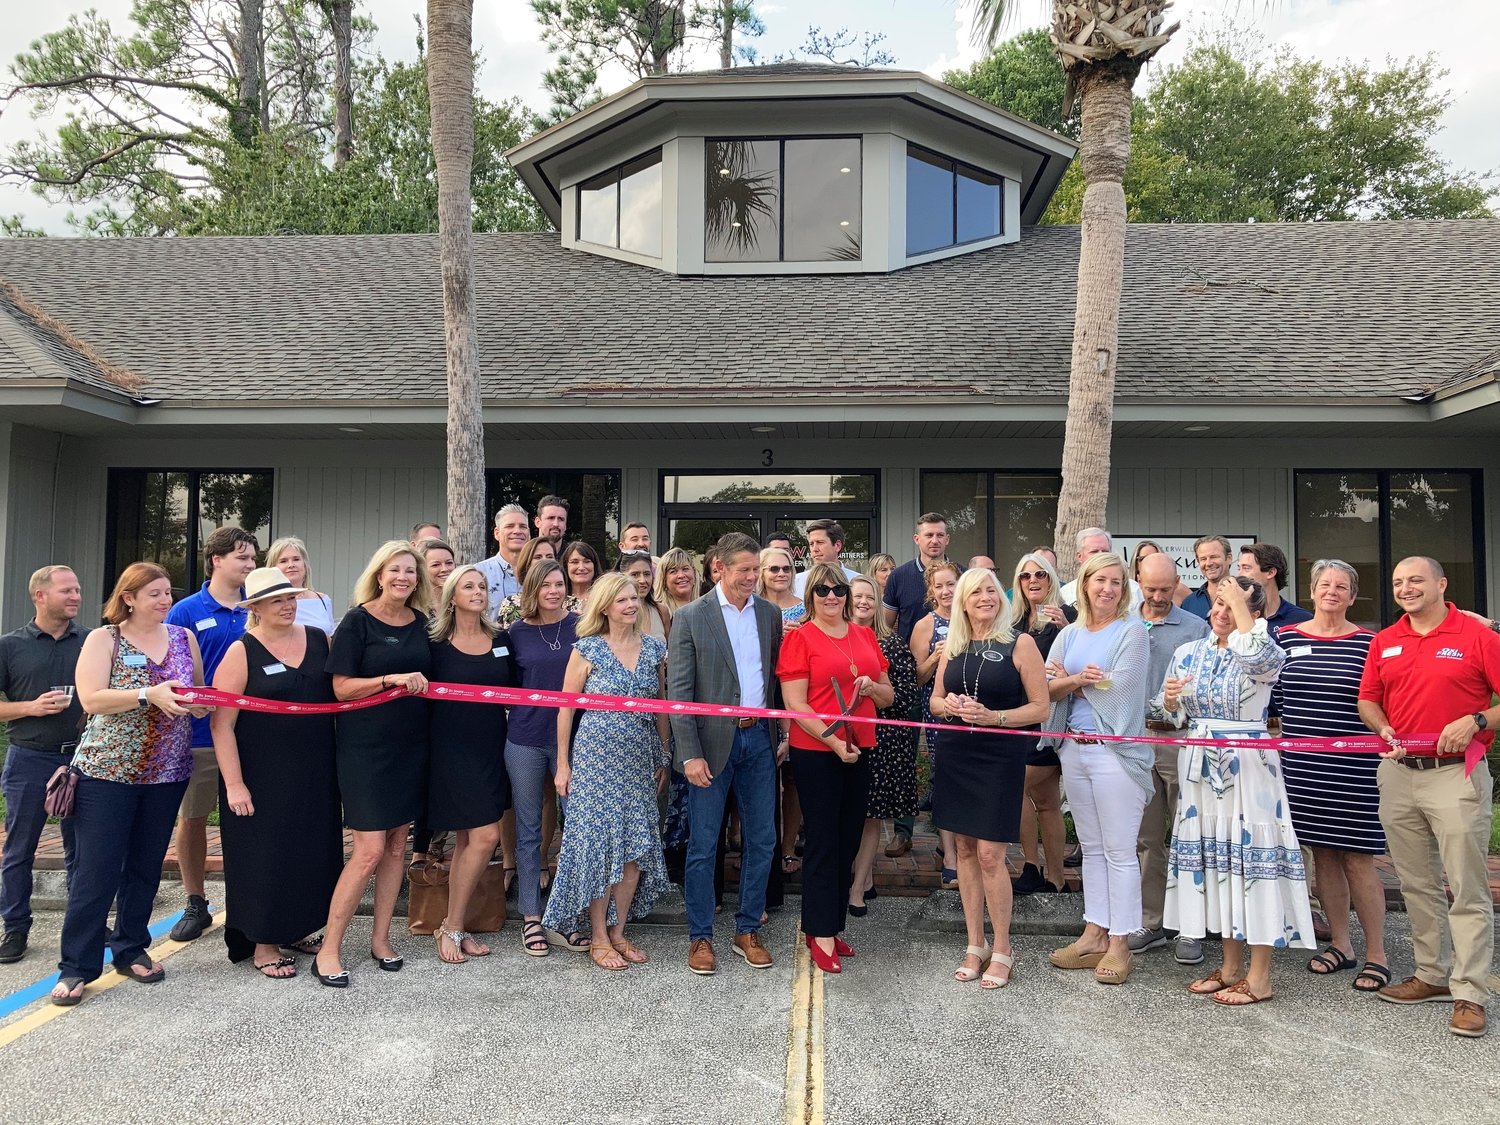 Margaret Sherrill, operating principle, cuts the ribbon for Keller Williams Realty Atlantic Partners’ new office in Sawgrass Village as team leader Mark Dilworth looks on. St. Johns County Chamber of Commerce Ponte Vedra Beach Division conducted the ceremony.